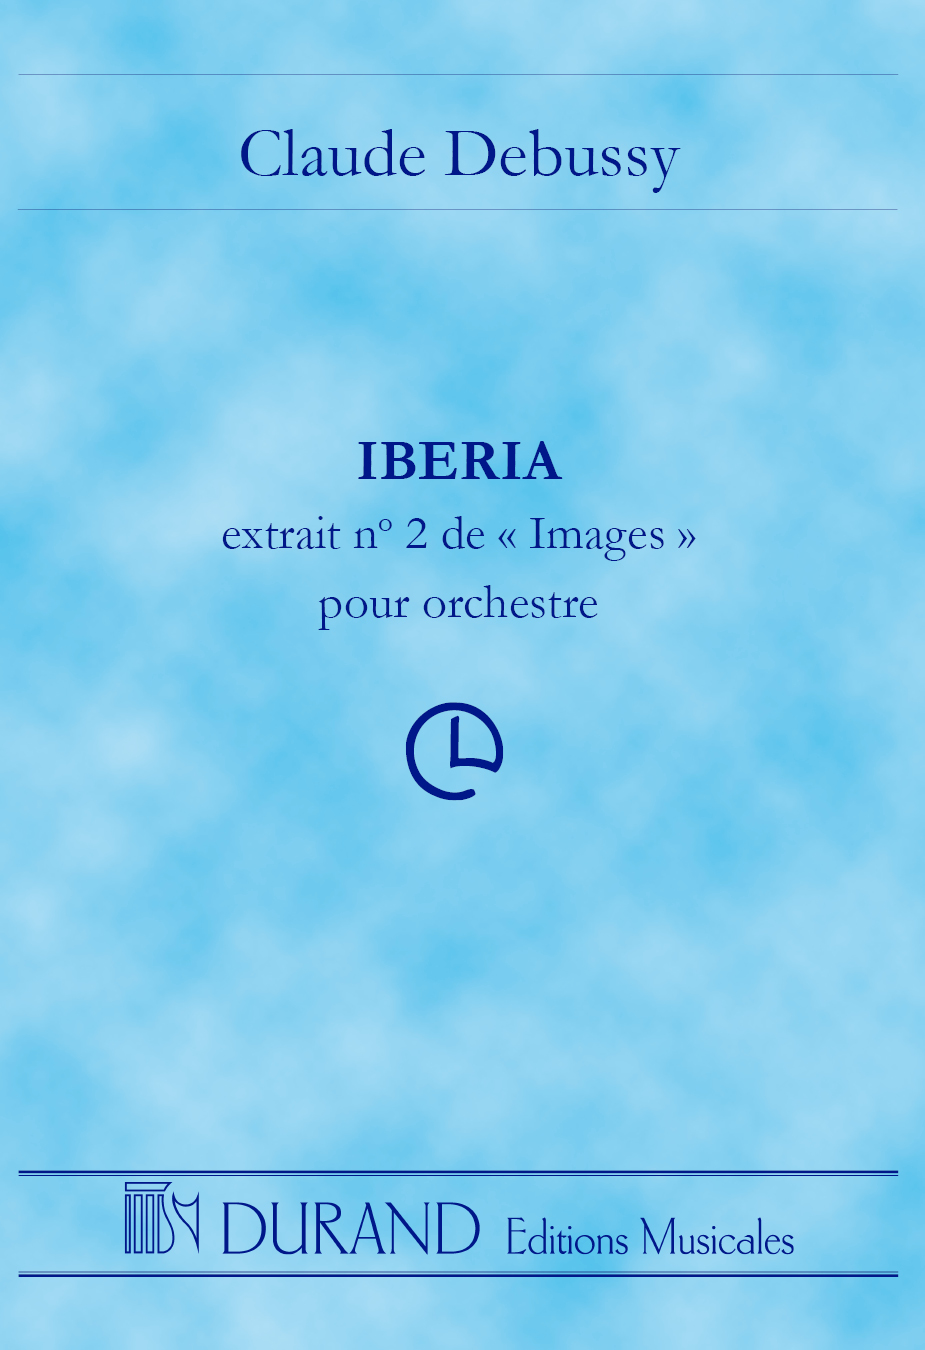 Claude Debussy: Iberia 'Images': Orchestra: Study Score